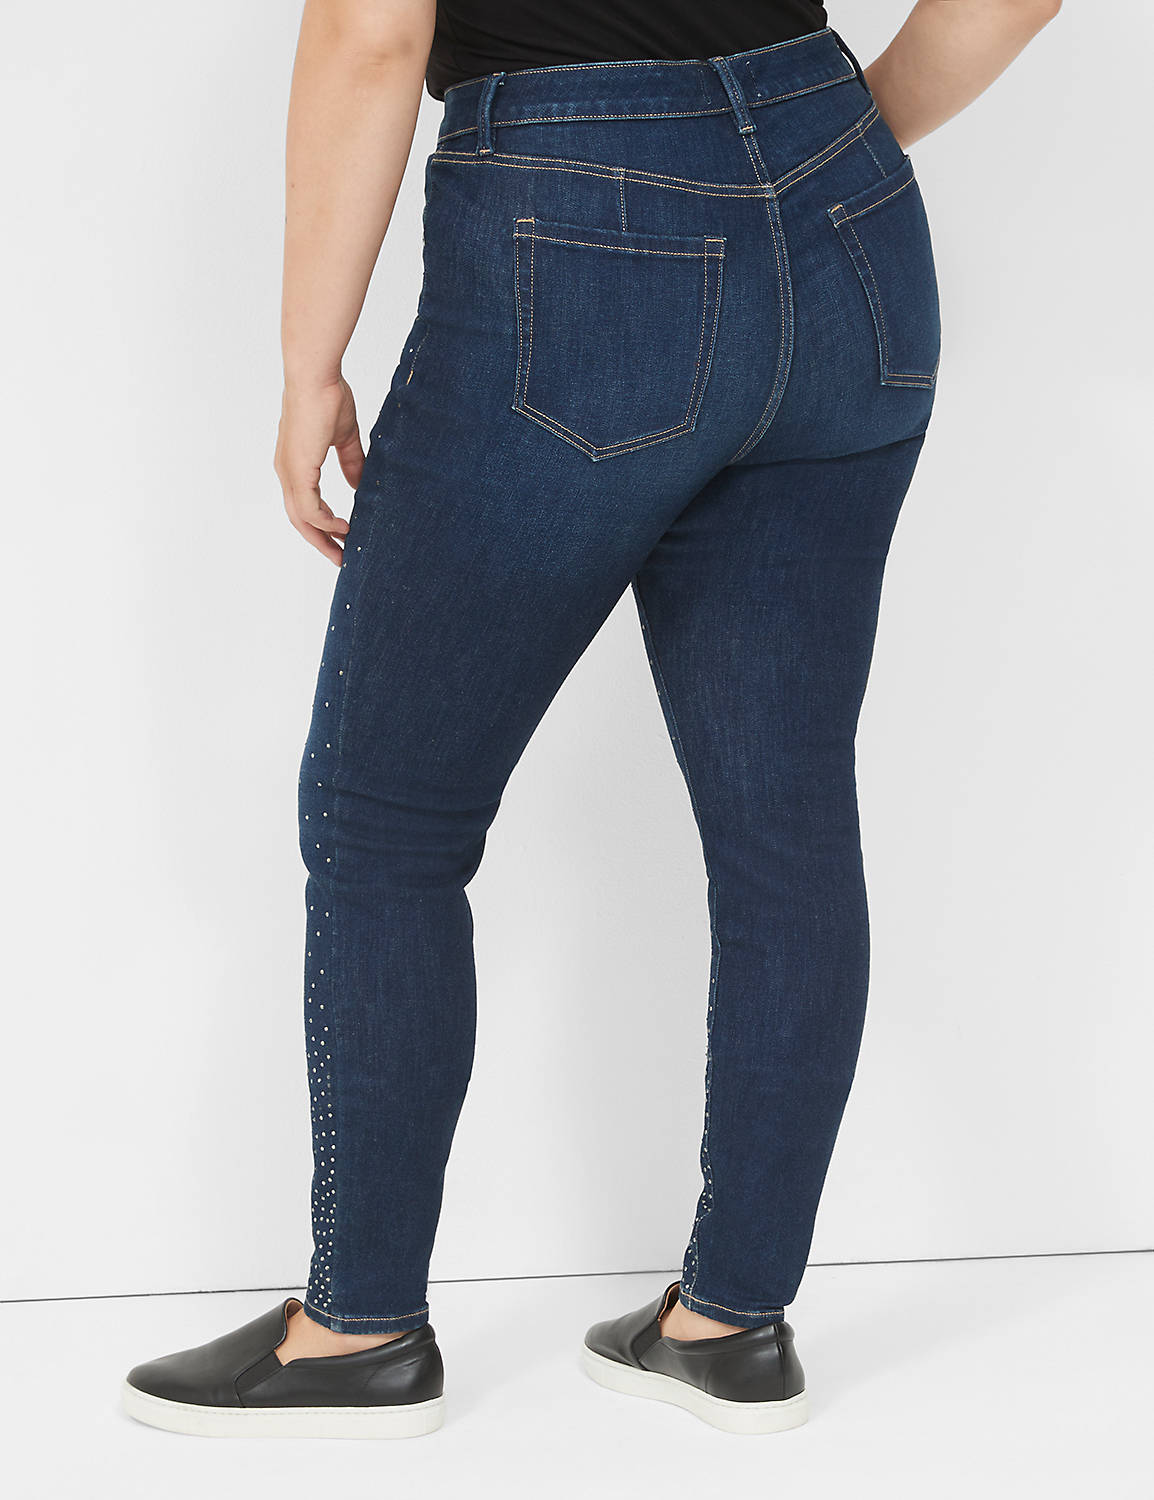 SIGNATURE MID RISE SKINNY - ALLOVER Product Image 2